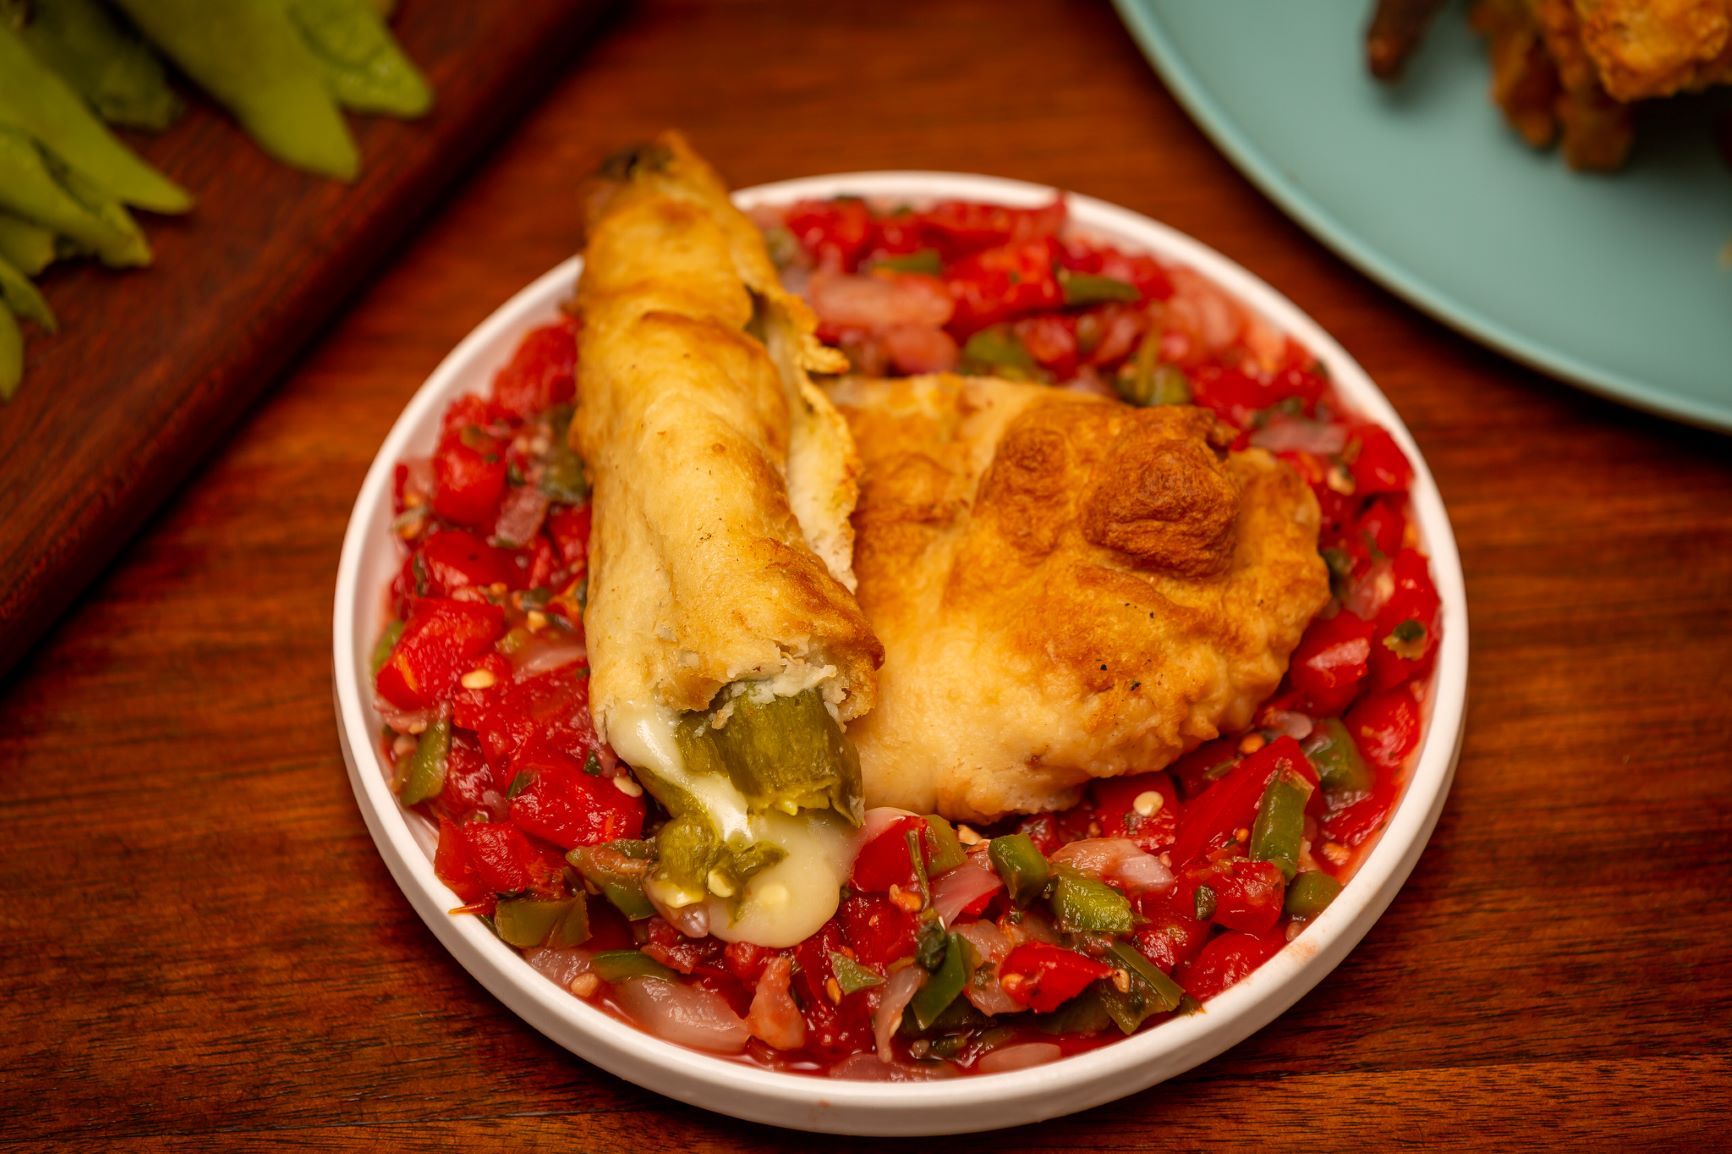 Hatch Chile Rellenos - The Fresh Chile Company